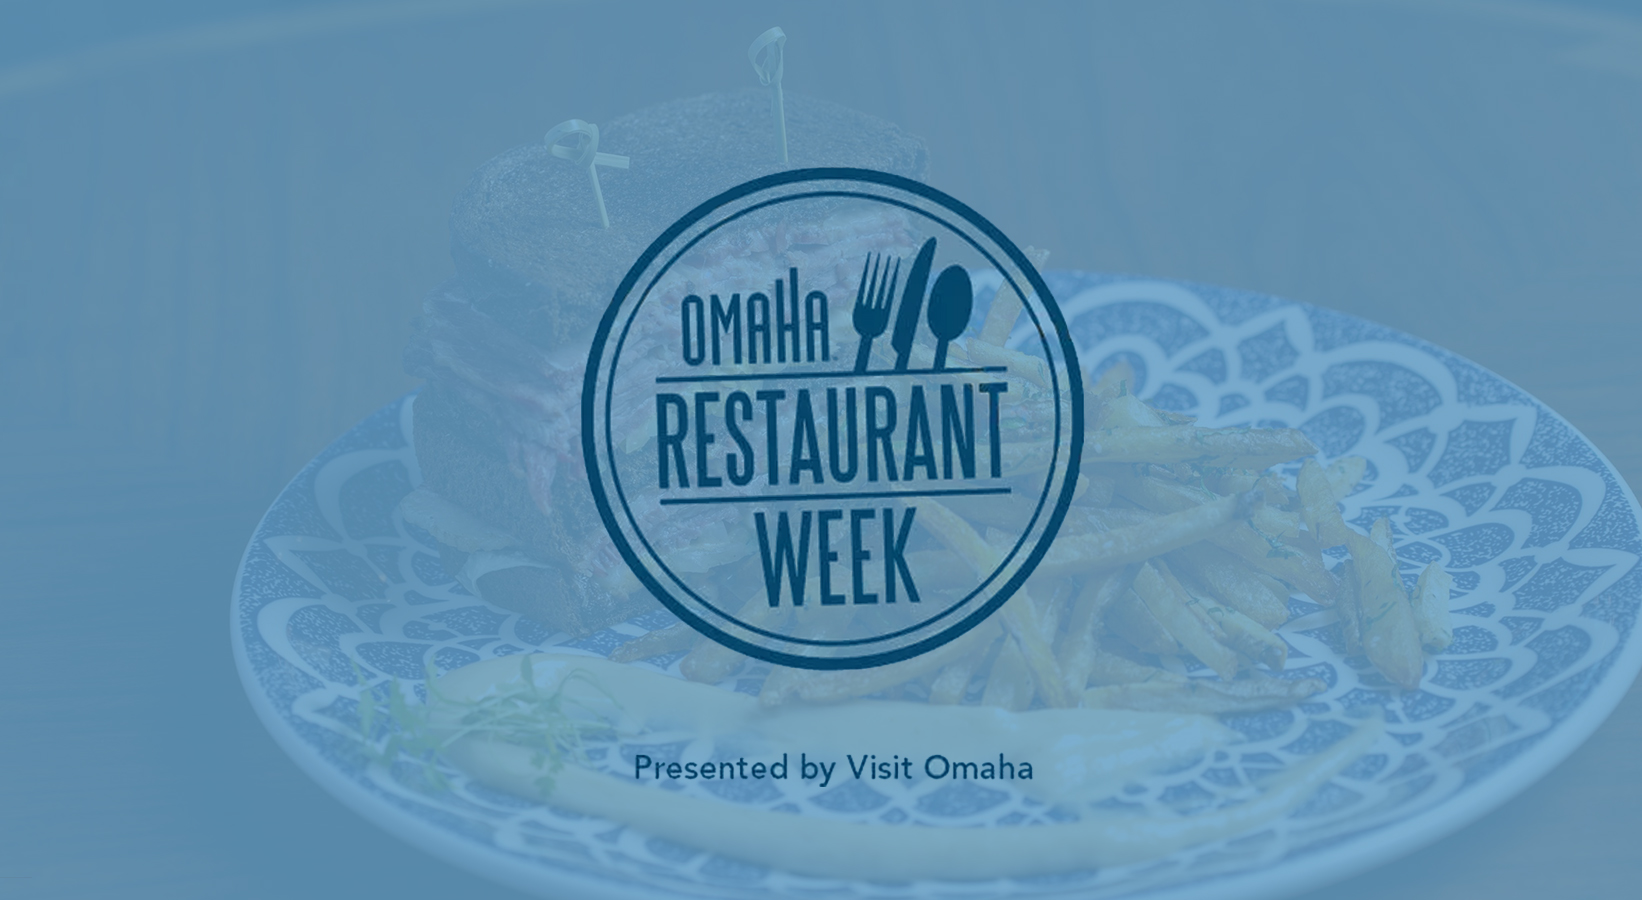 Photo of reuben sandwich and french fries with light blue overlay and Omaha Restaurant Week logo Presented by Visit Omaha